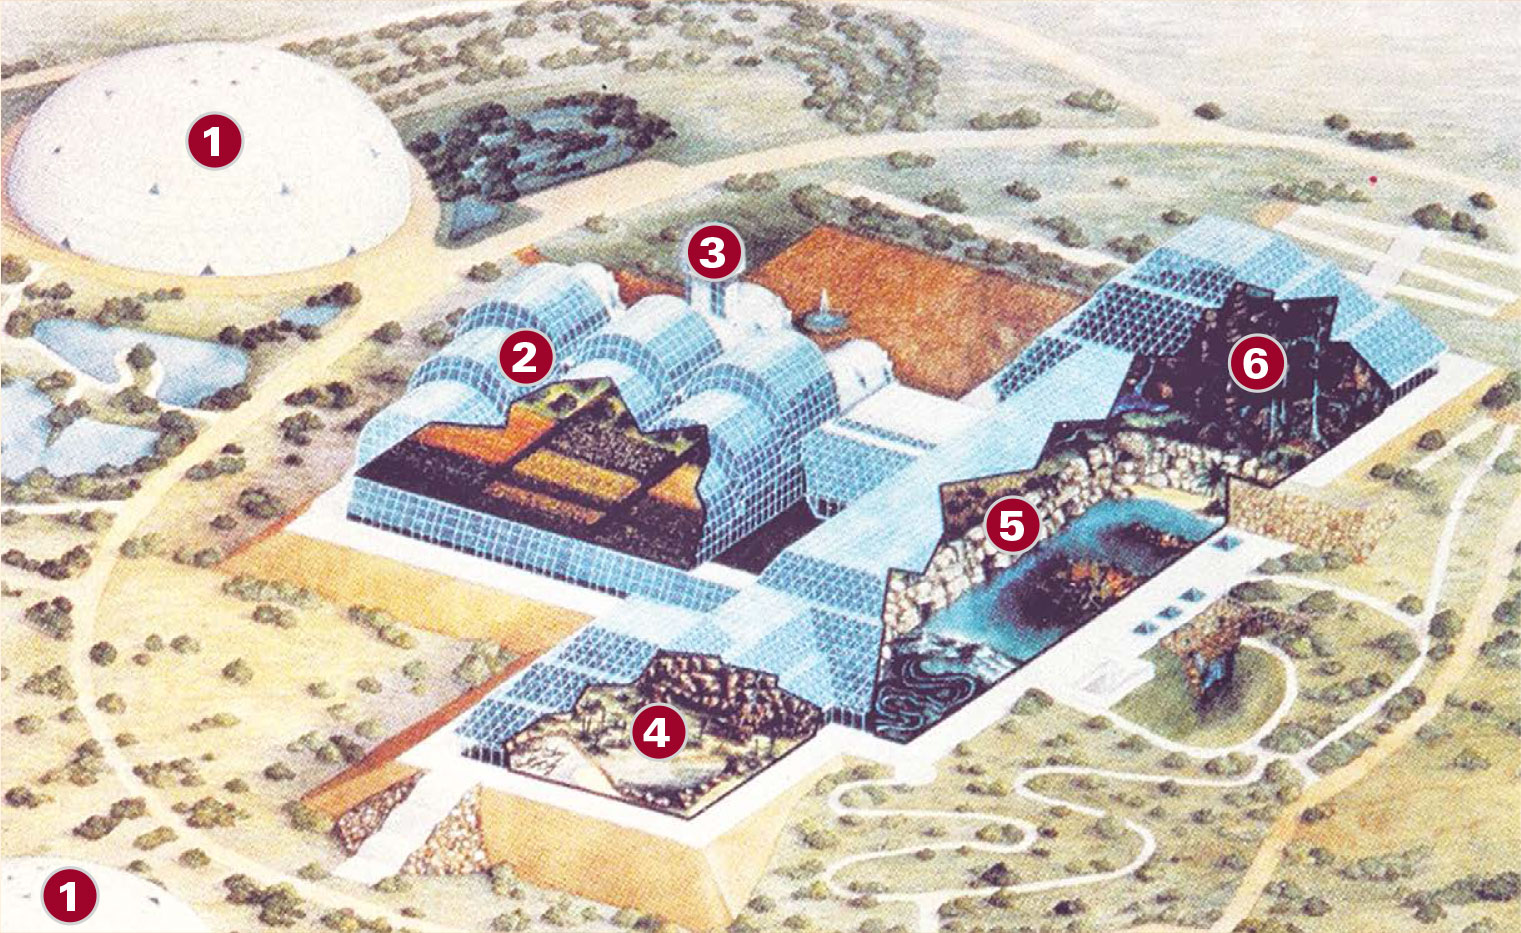 A drawing of the exterior of Biosphere 2, with cut aways to show the interior. The building is a multi-part glass structure surrounded by fields.